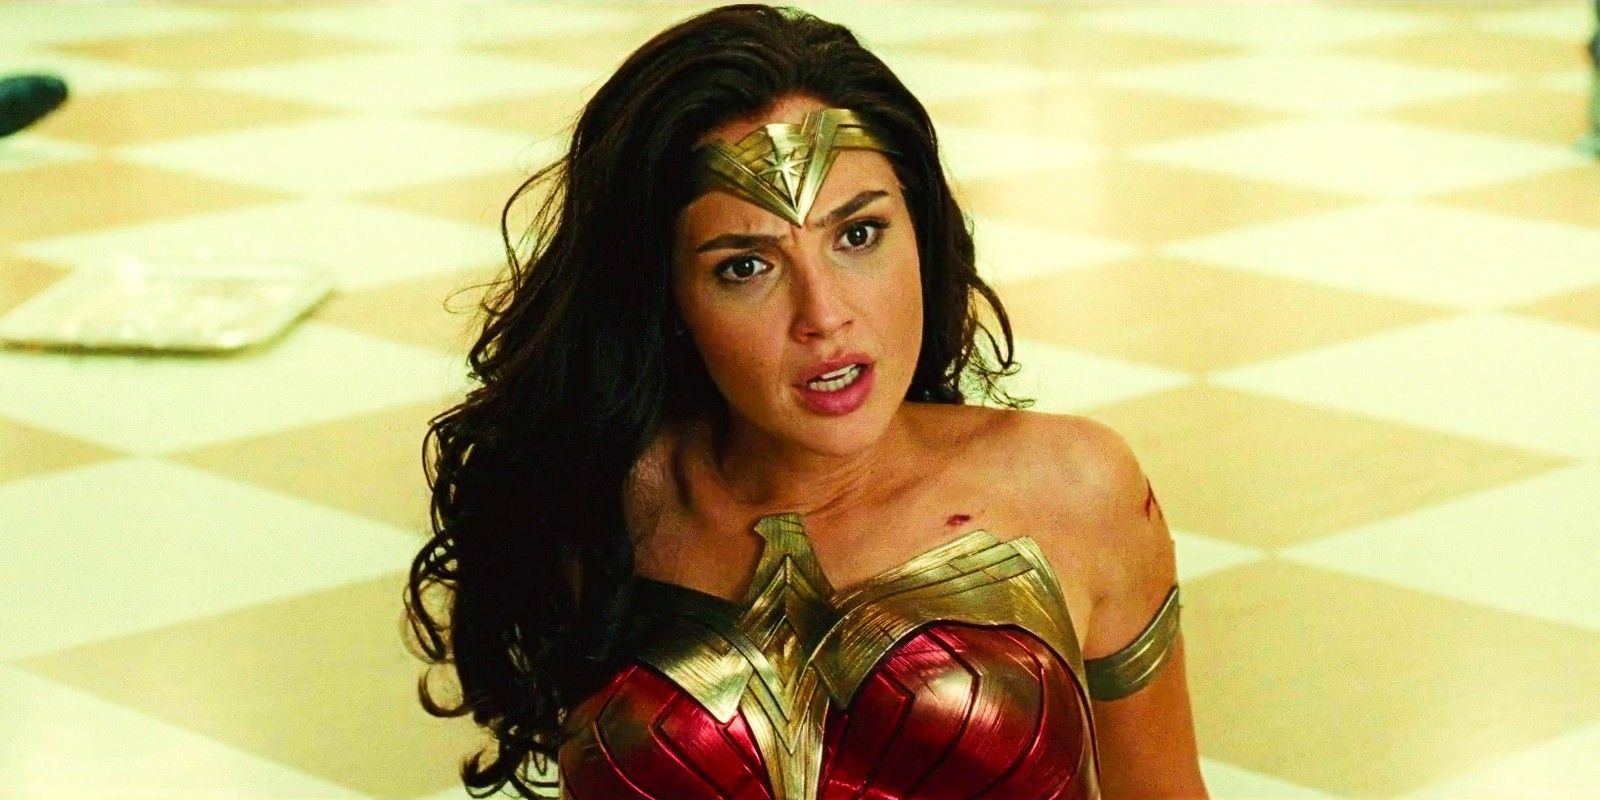 DC Is "Not Interested" In Making A New Wonder Woman Movie Right Now Despite 2017's $800m Success